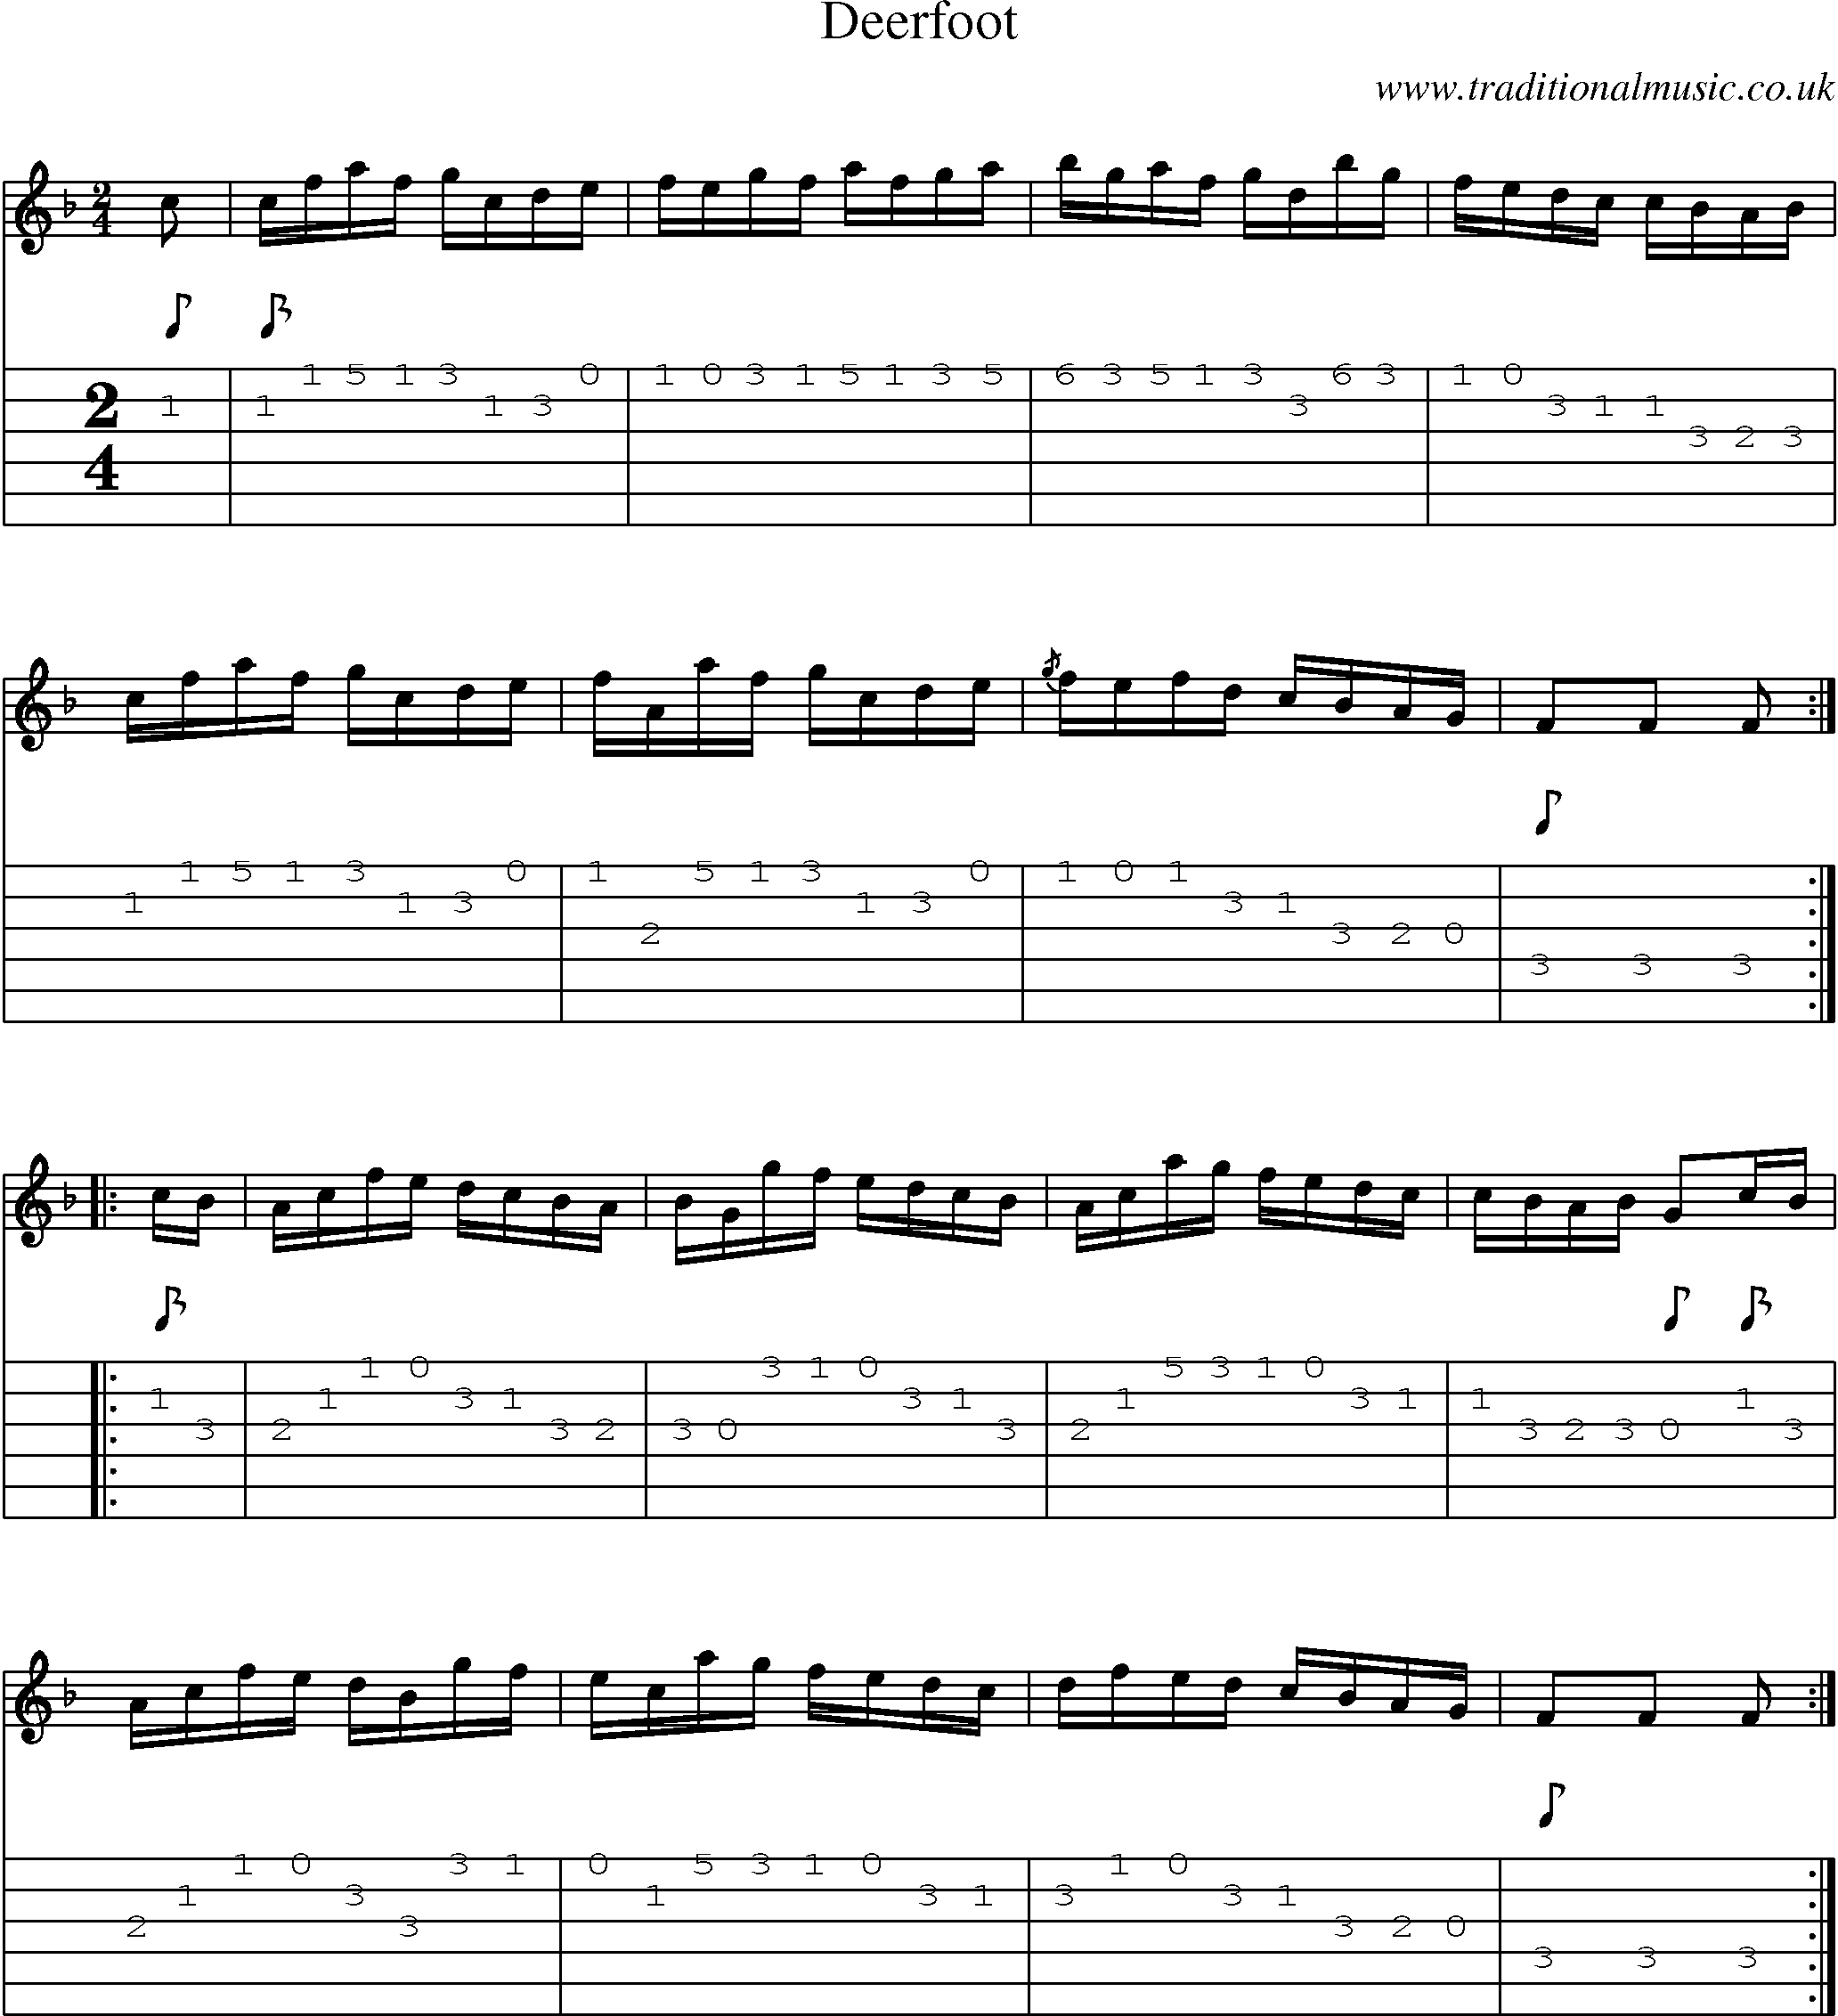 Music Score and Guitar Tabs for Deerfoot